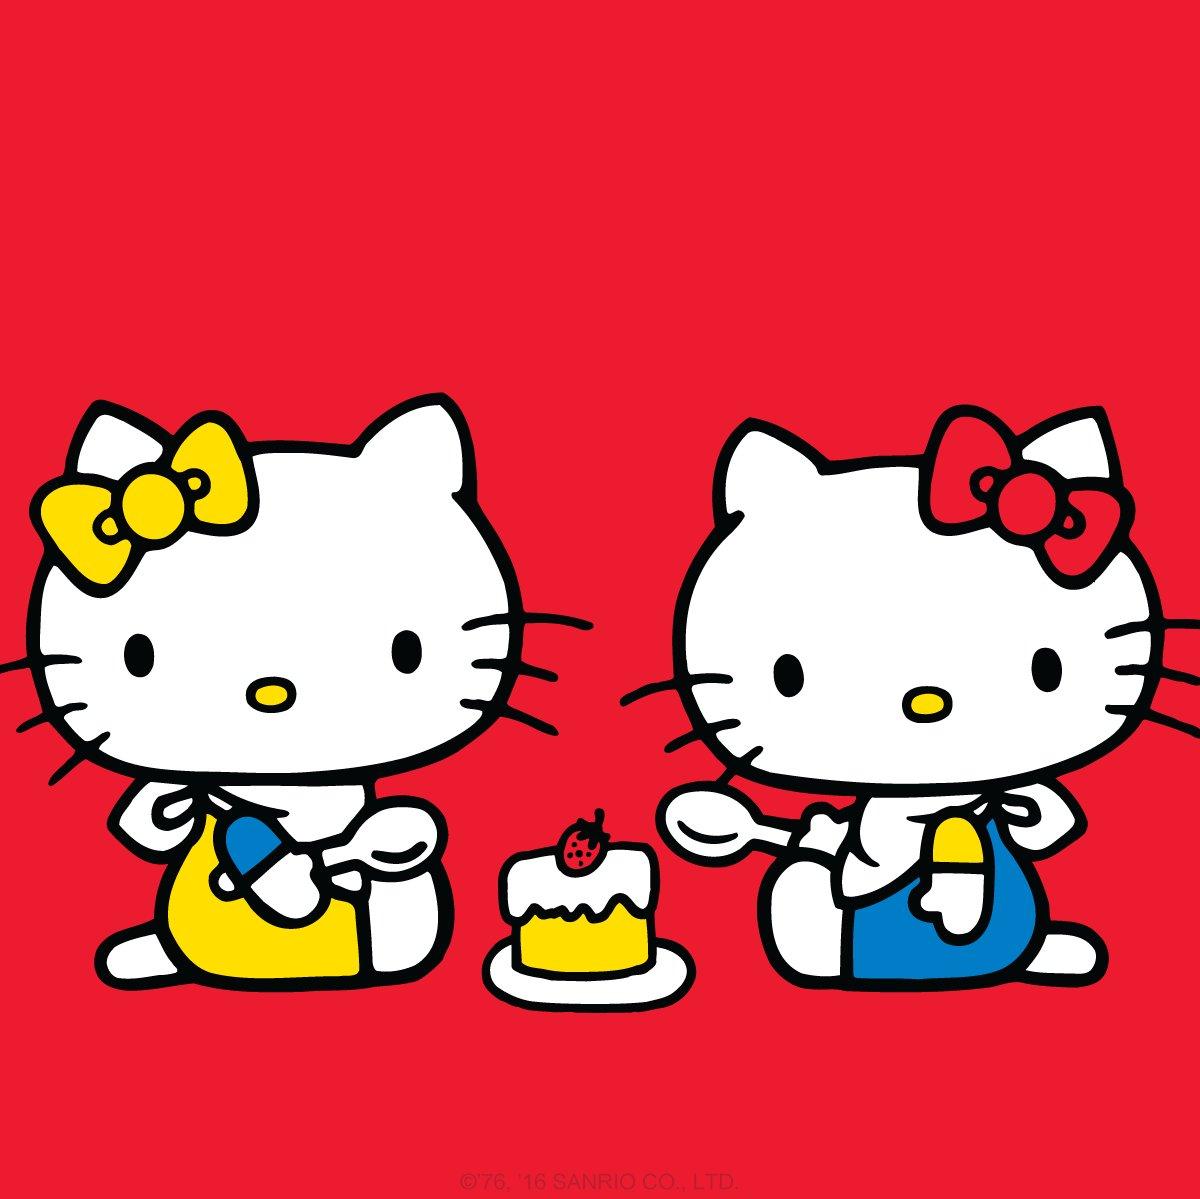 Hello Kitty on Today is a very special day